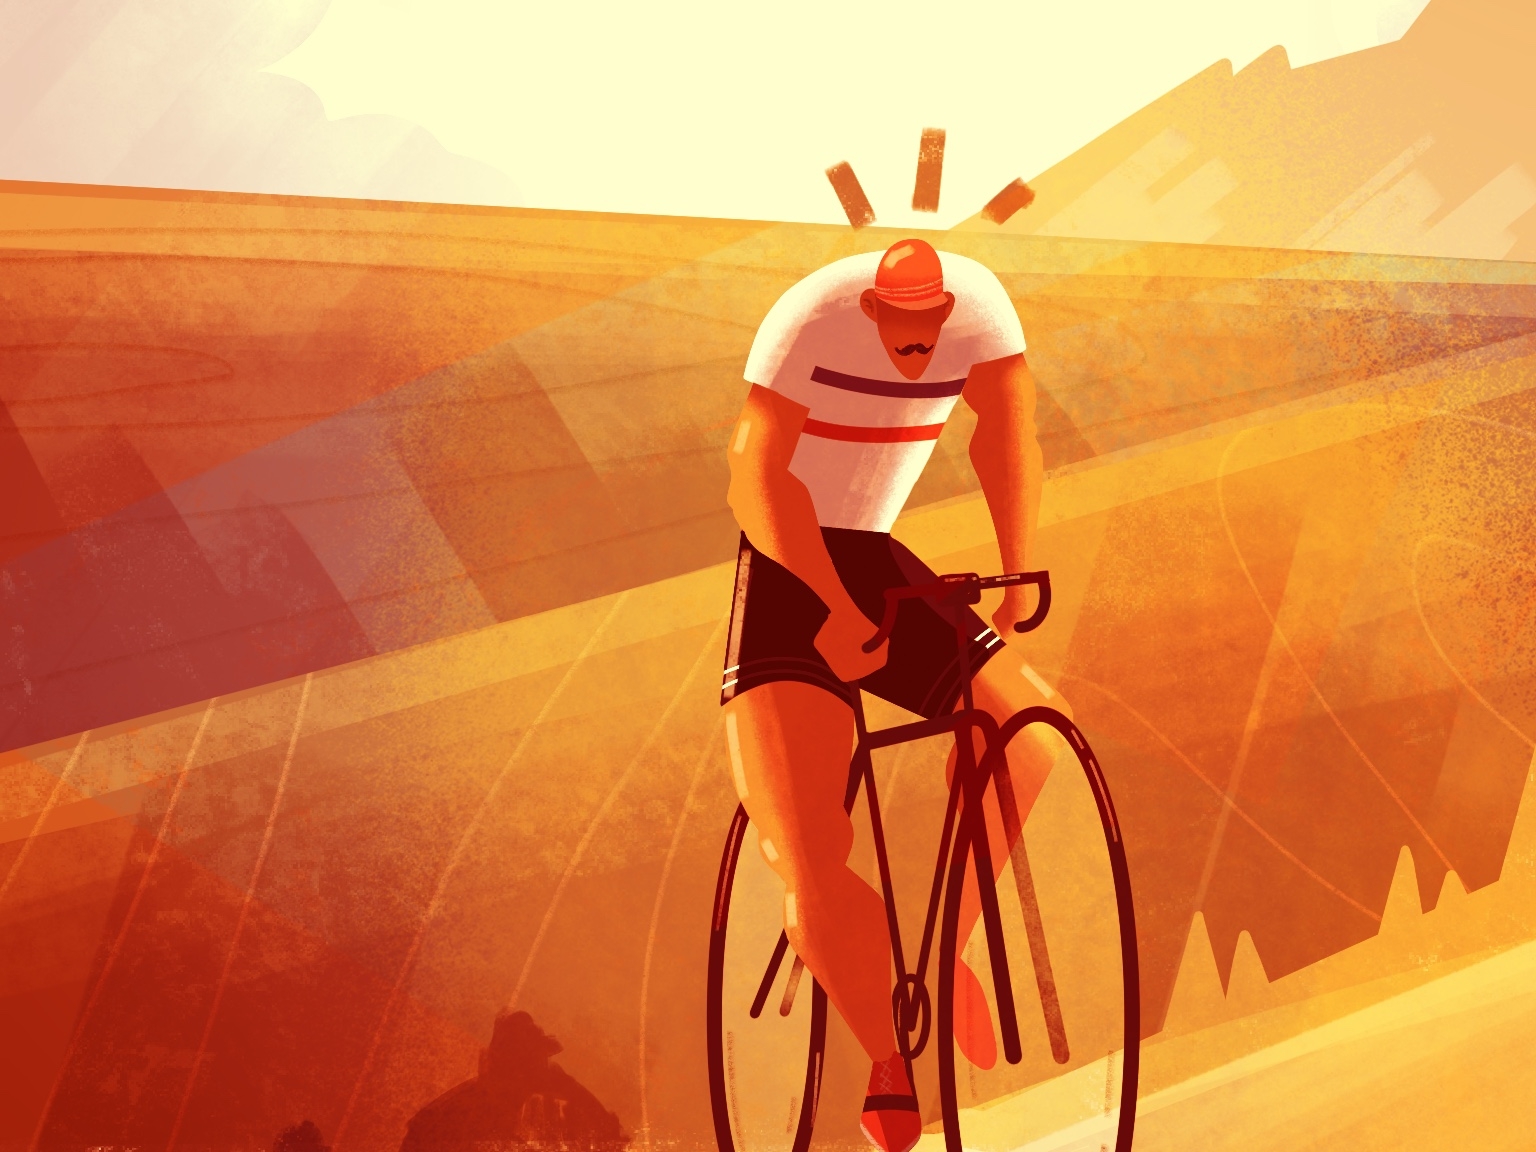 Tour de France 🚴♂️🇫🇷 art character cycling digital art editorial illustration illustration illustrator lille painting